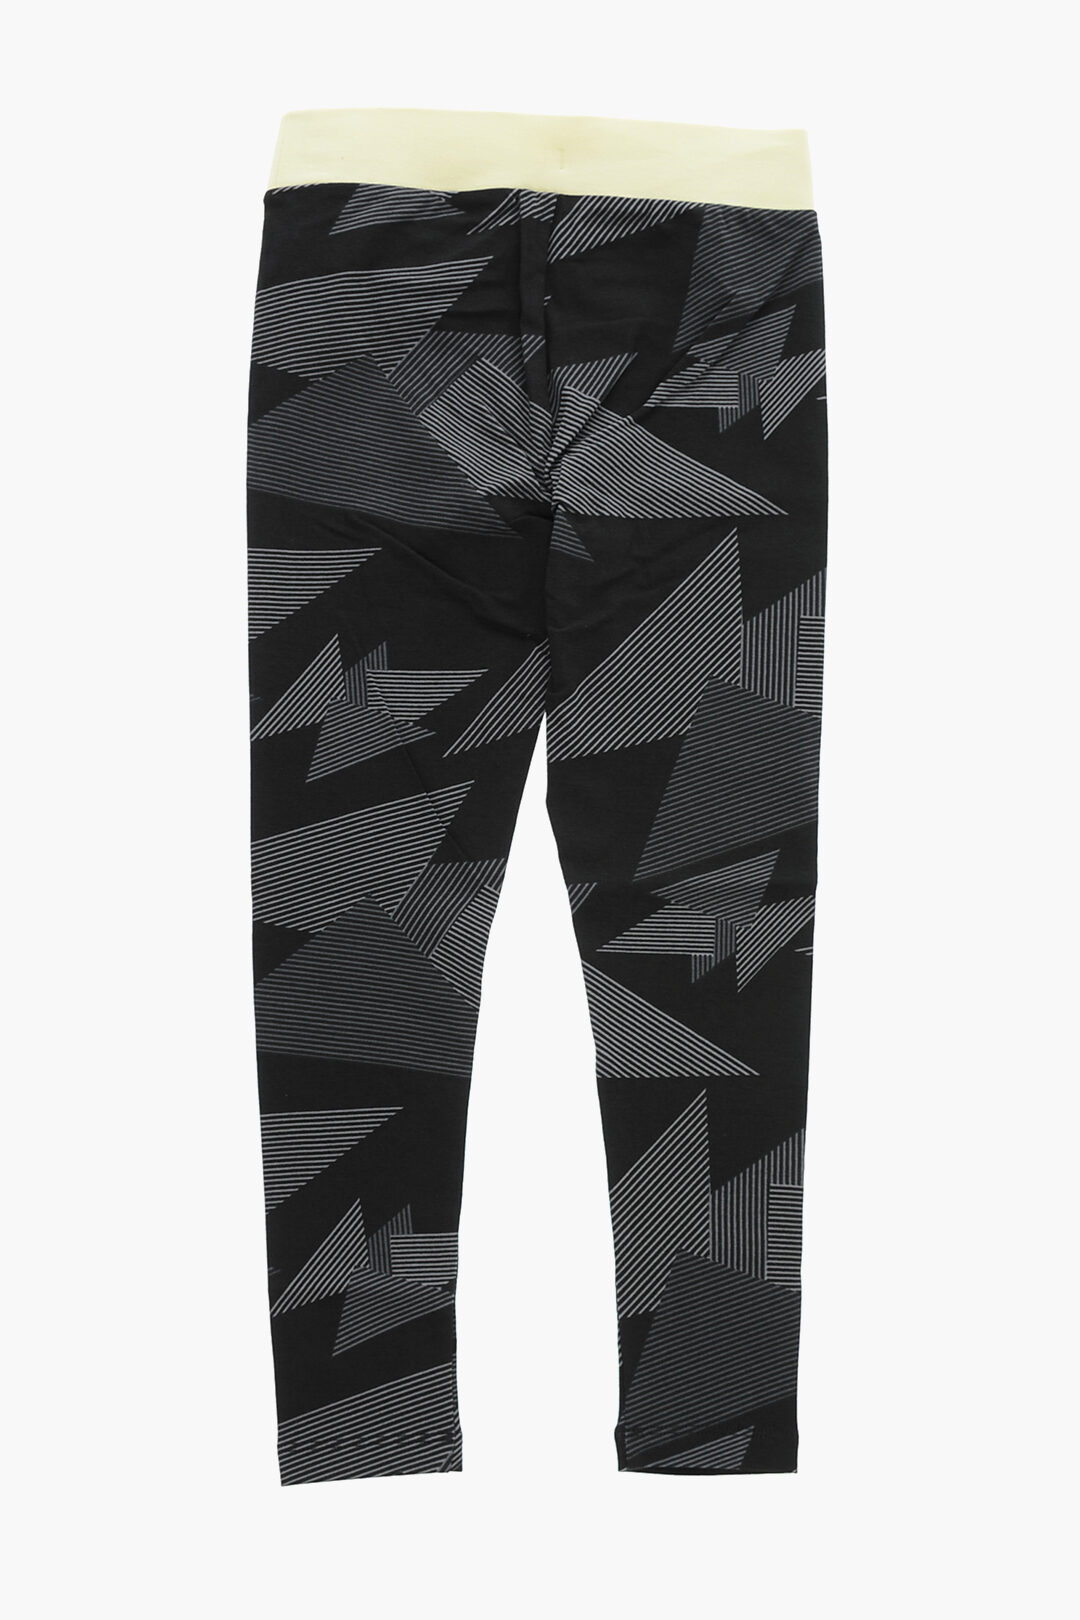 Nike KIDS AIR JORDAN Printed Leggings with Contrast Band on the Waist girls  - Glamood Outlet